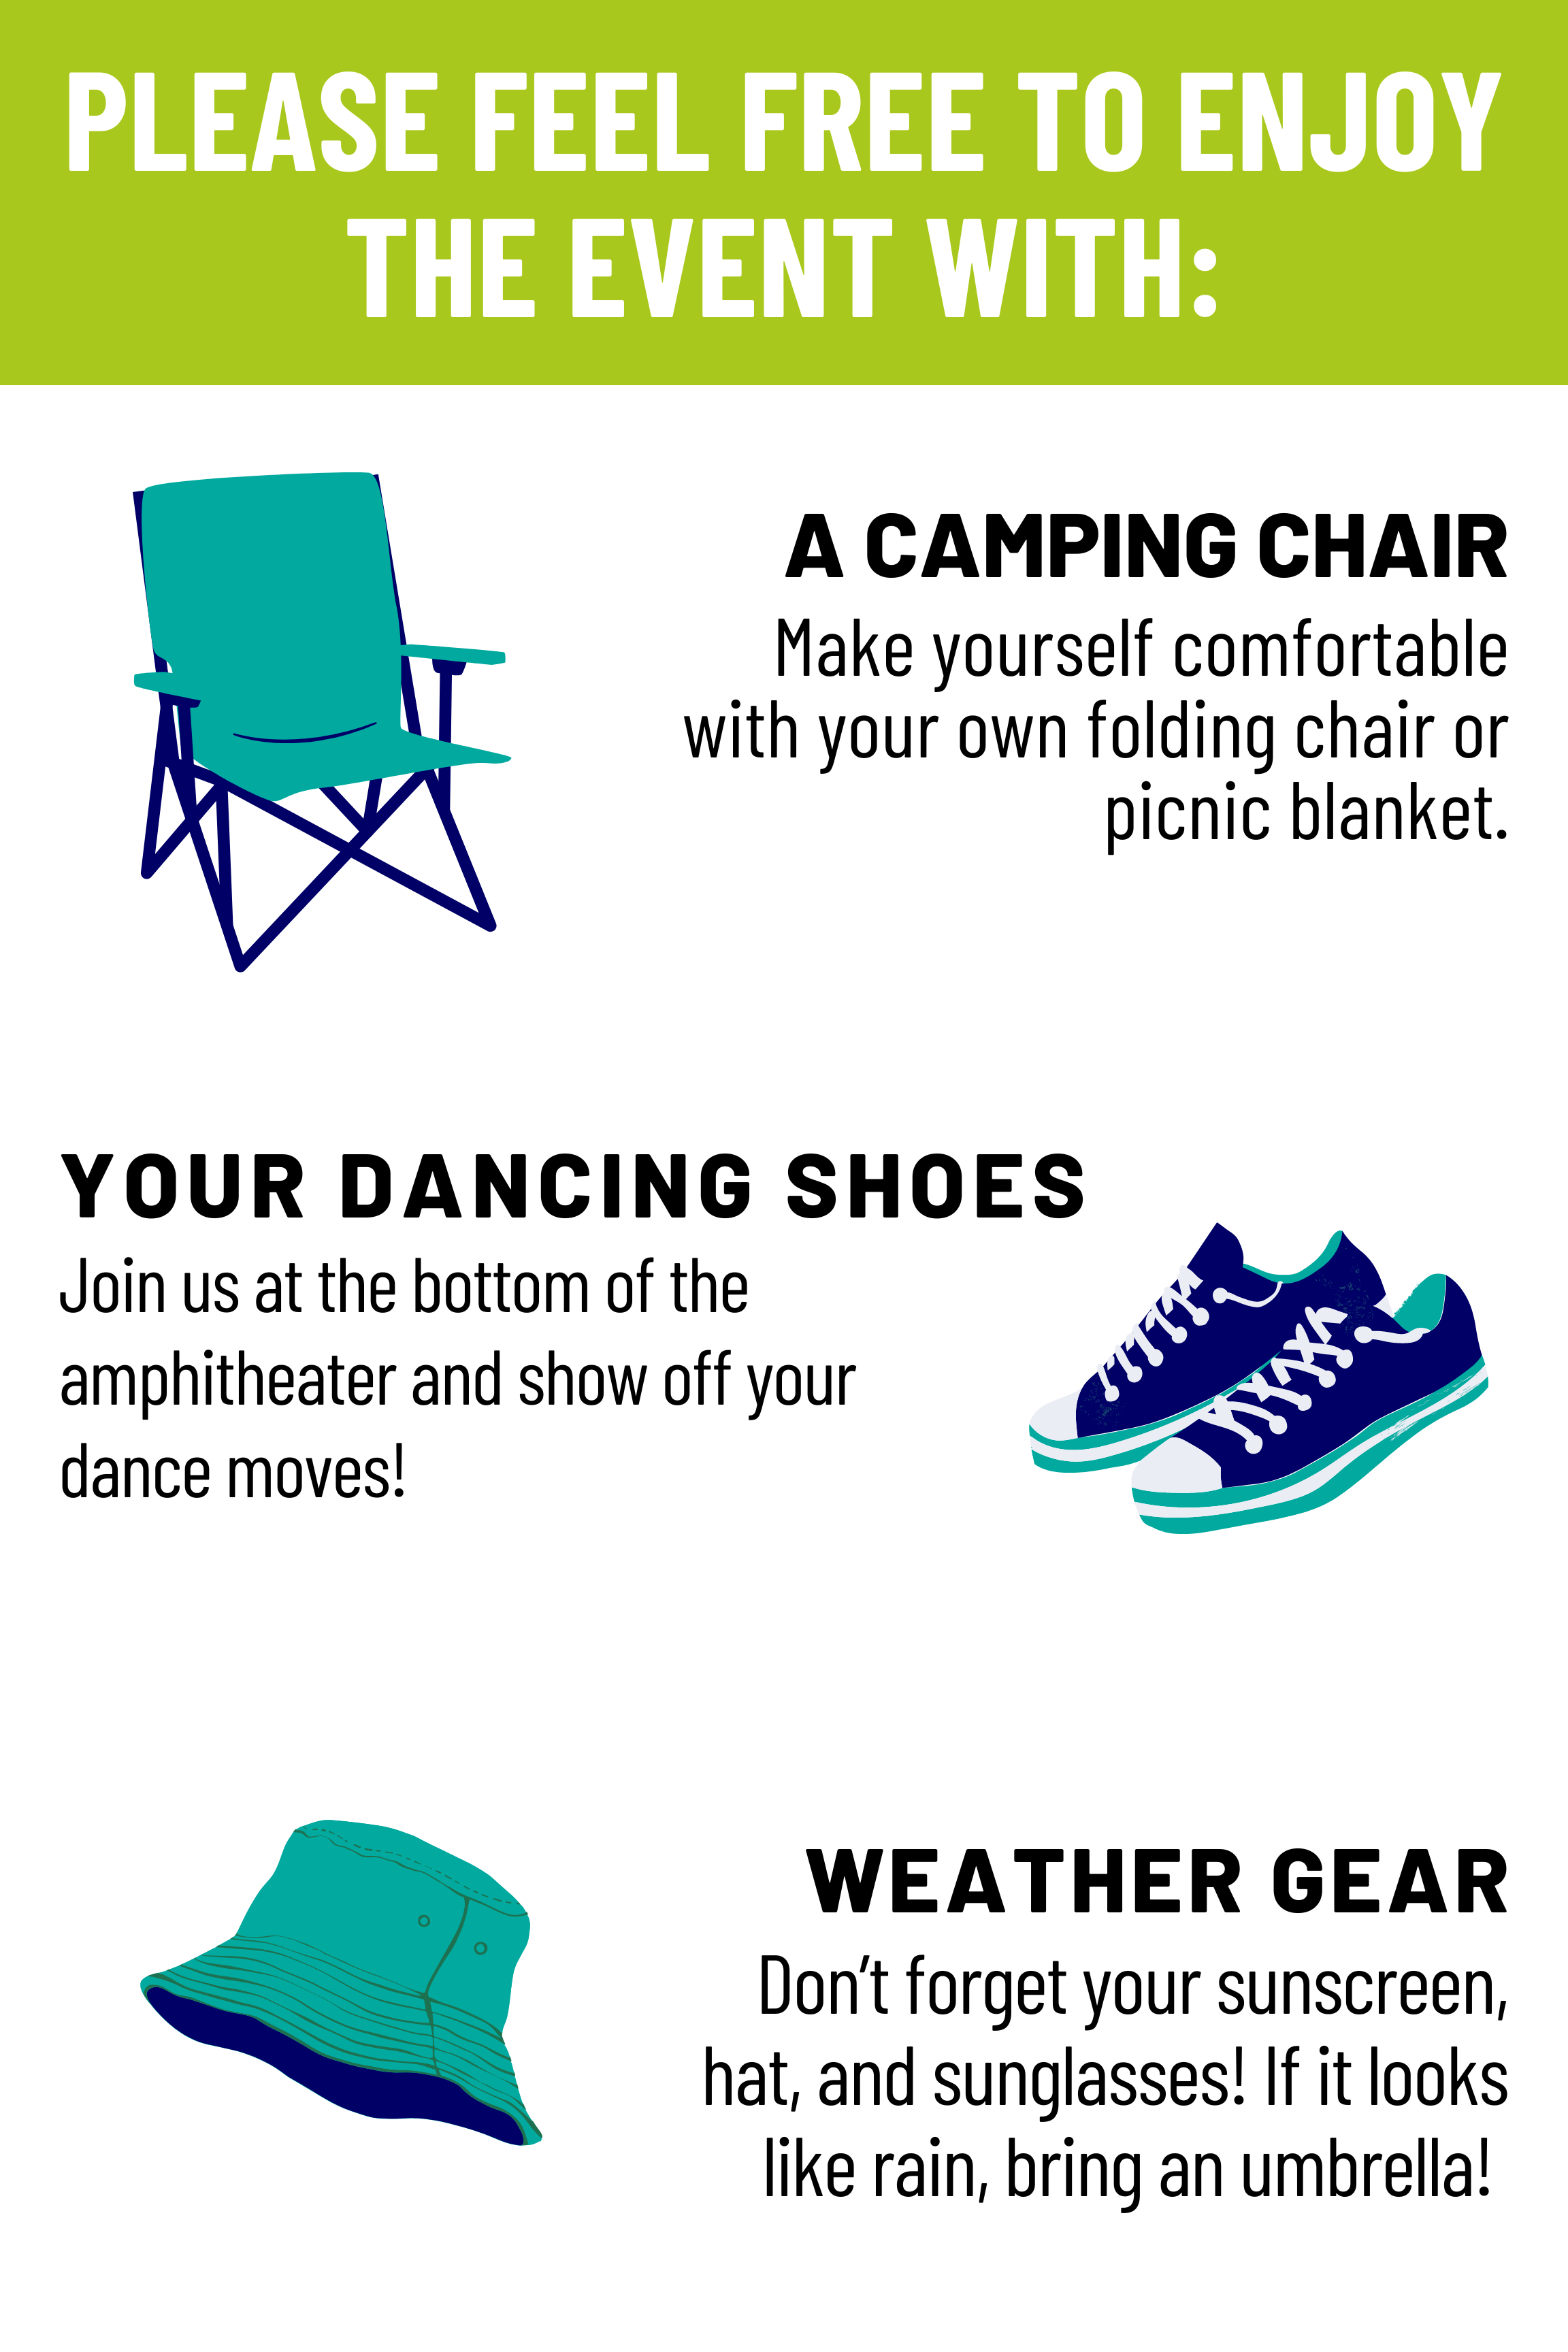 an image detailing what you are allowed to bring to the event. It is a good idea to bring a camping chair, your dancing shoes, and sun protection or an umbrella.